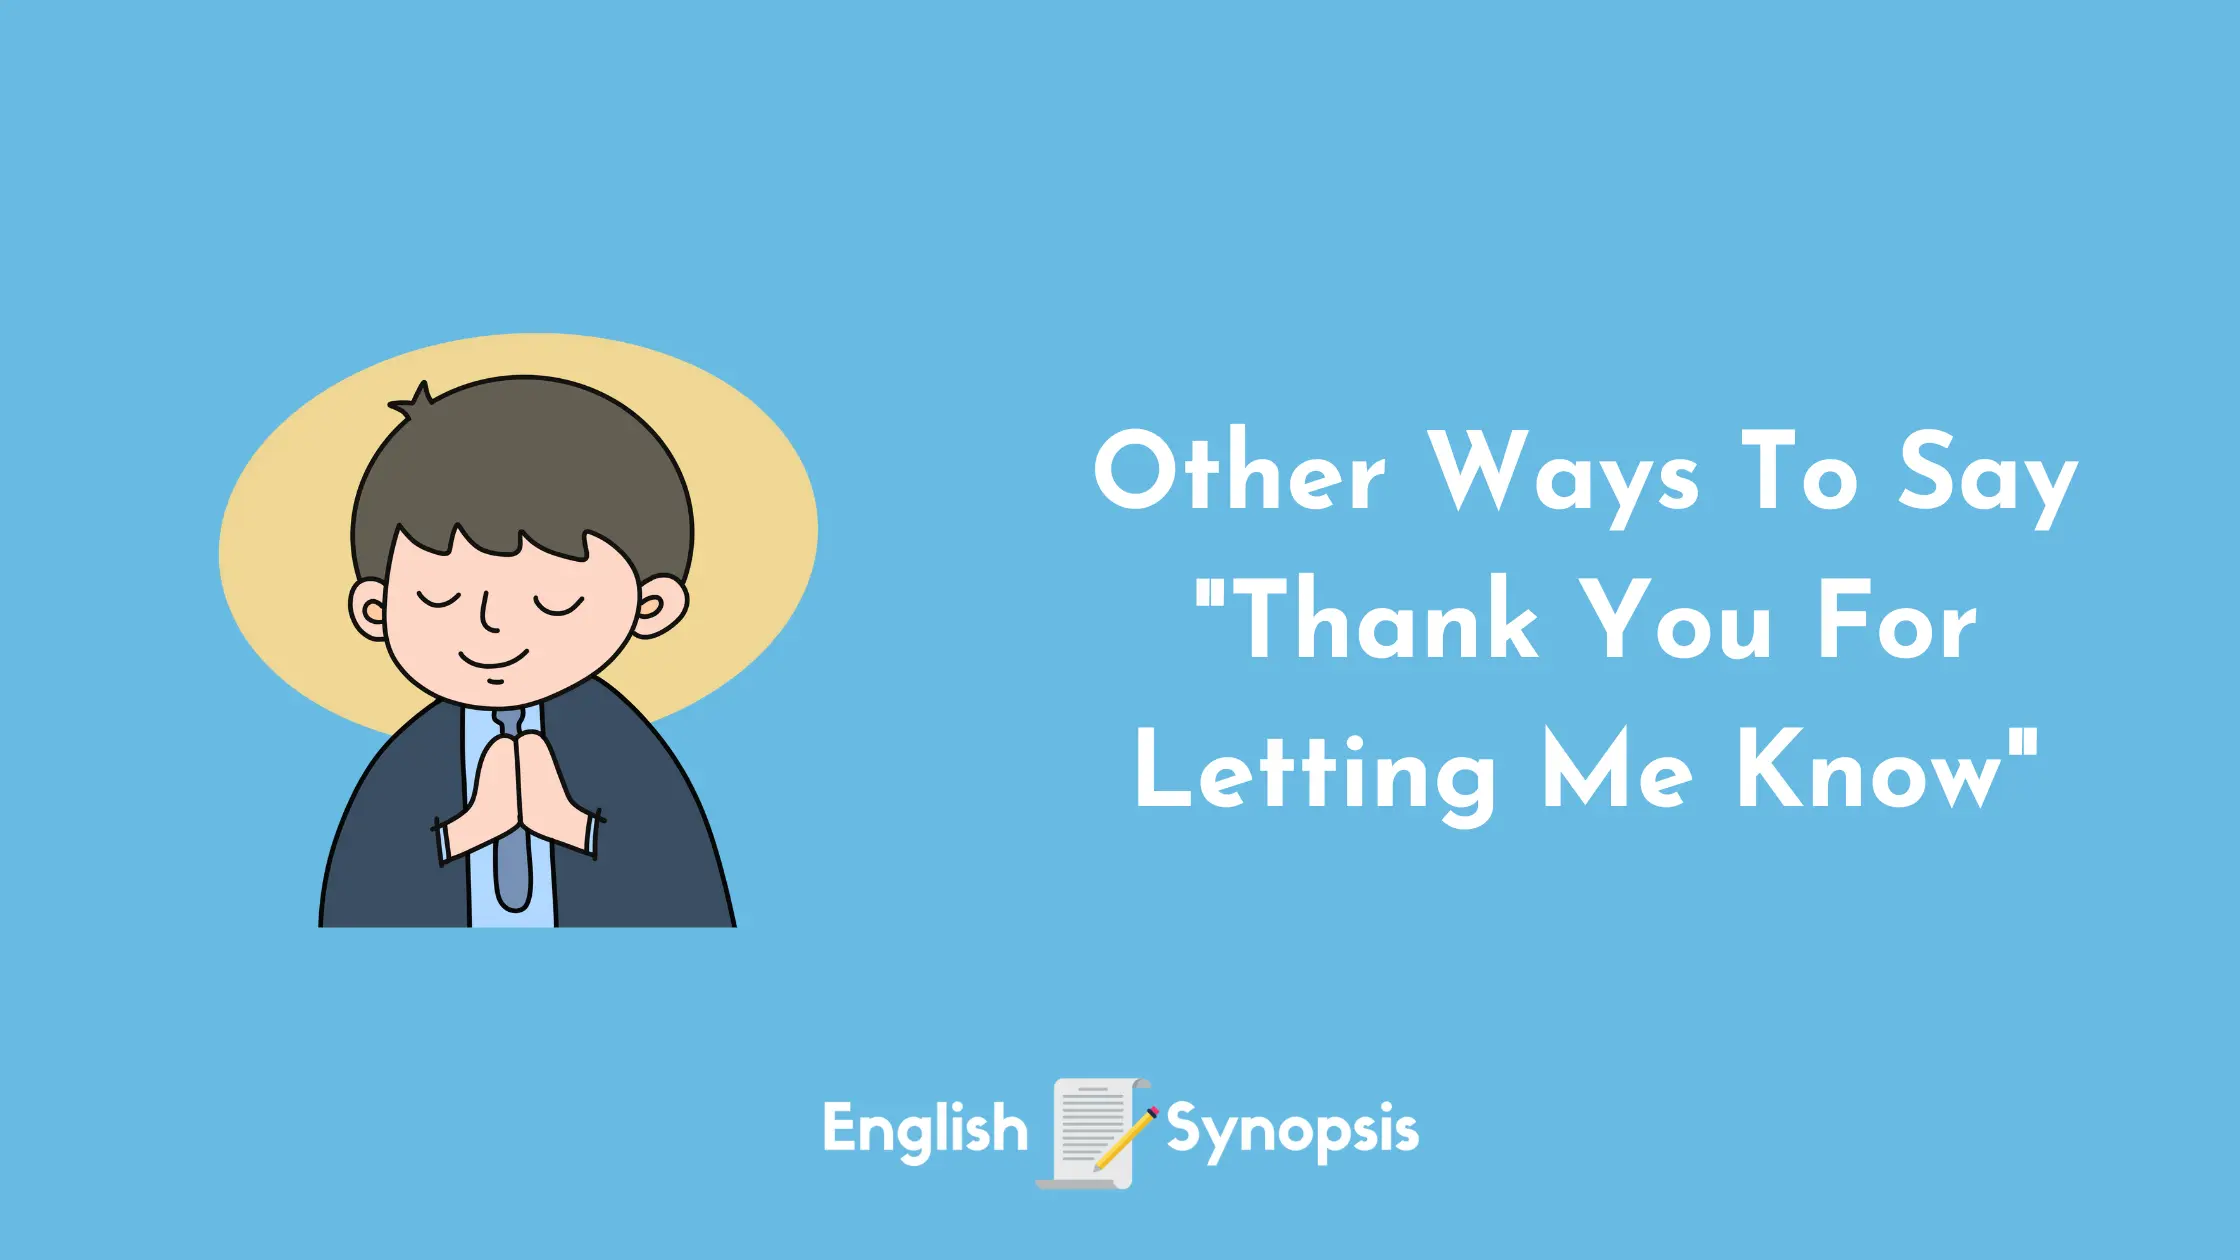 Other Ways To Say "Thank You For Letting Me Know"